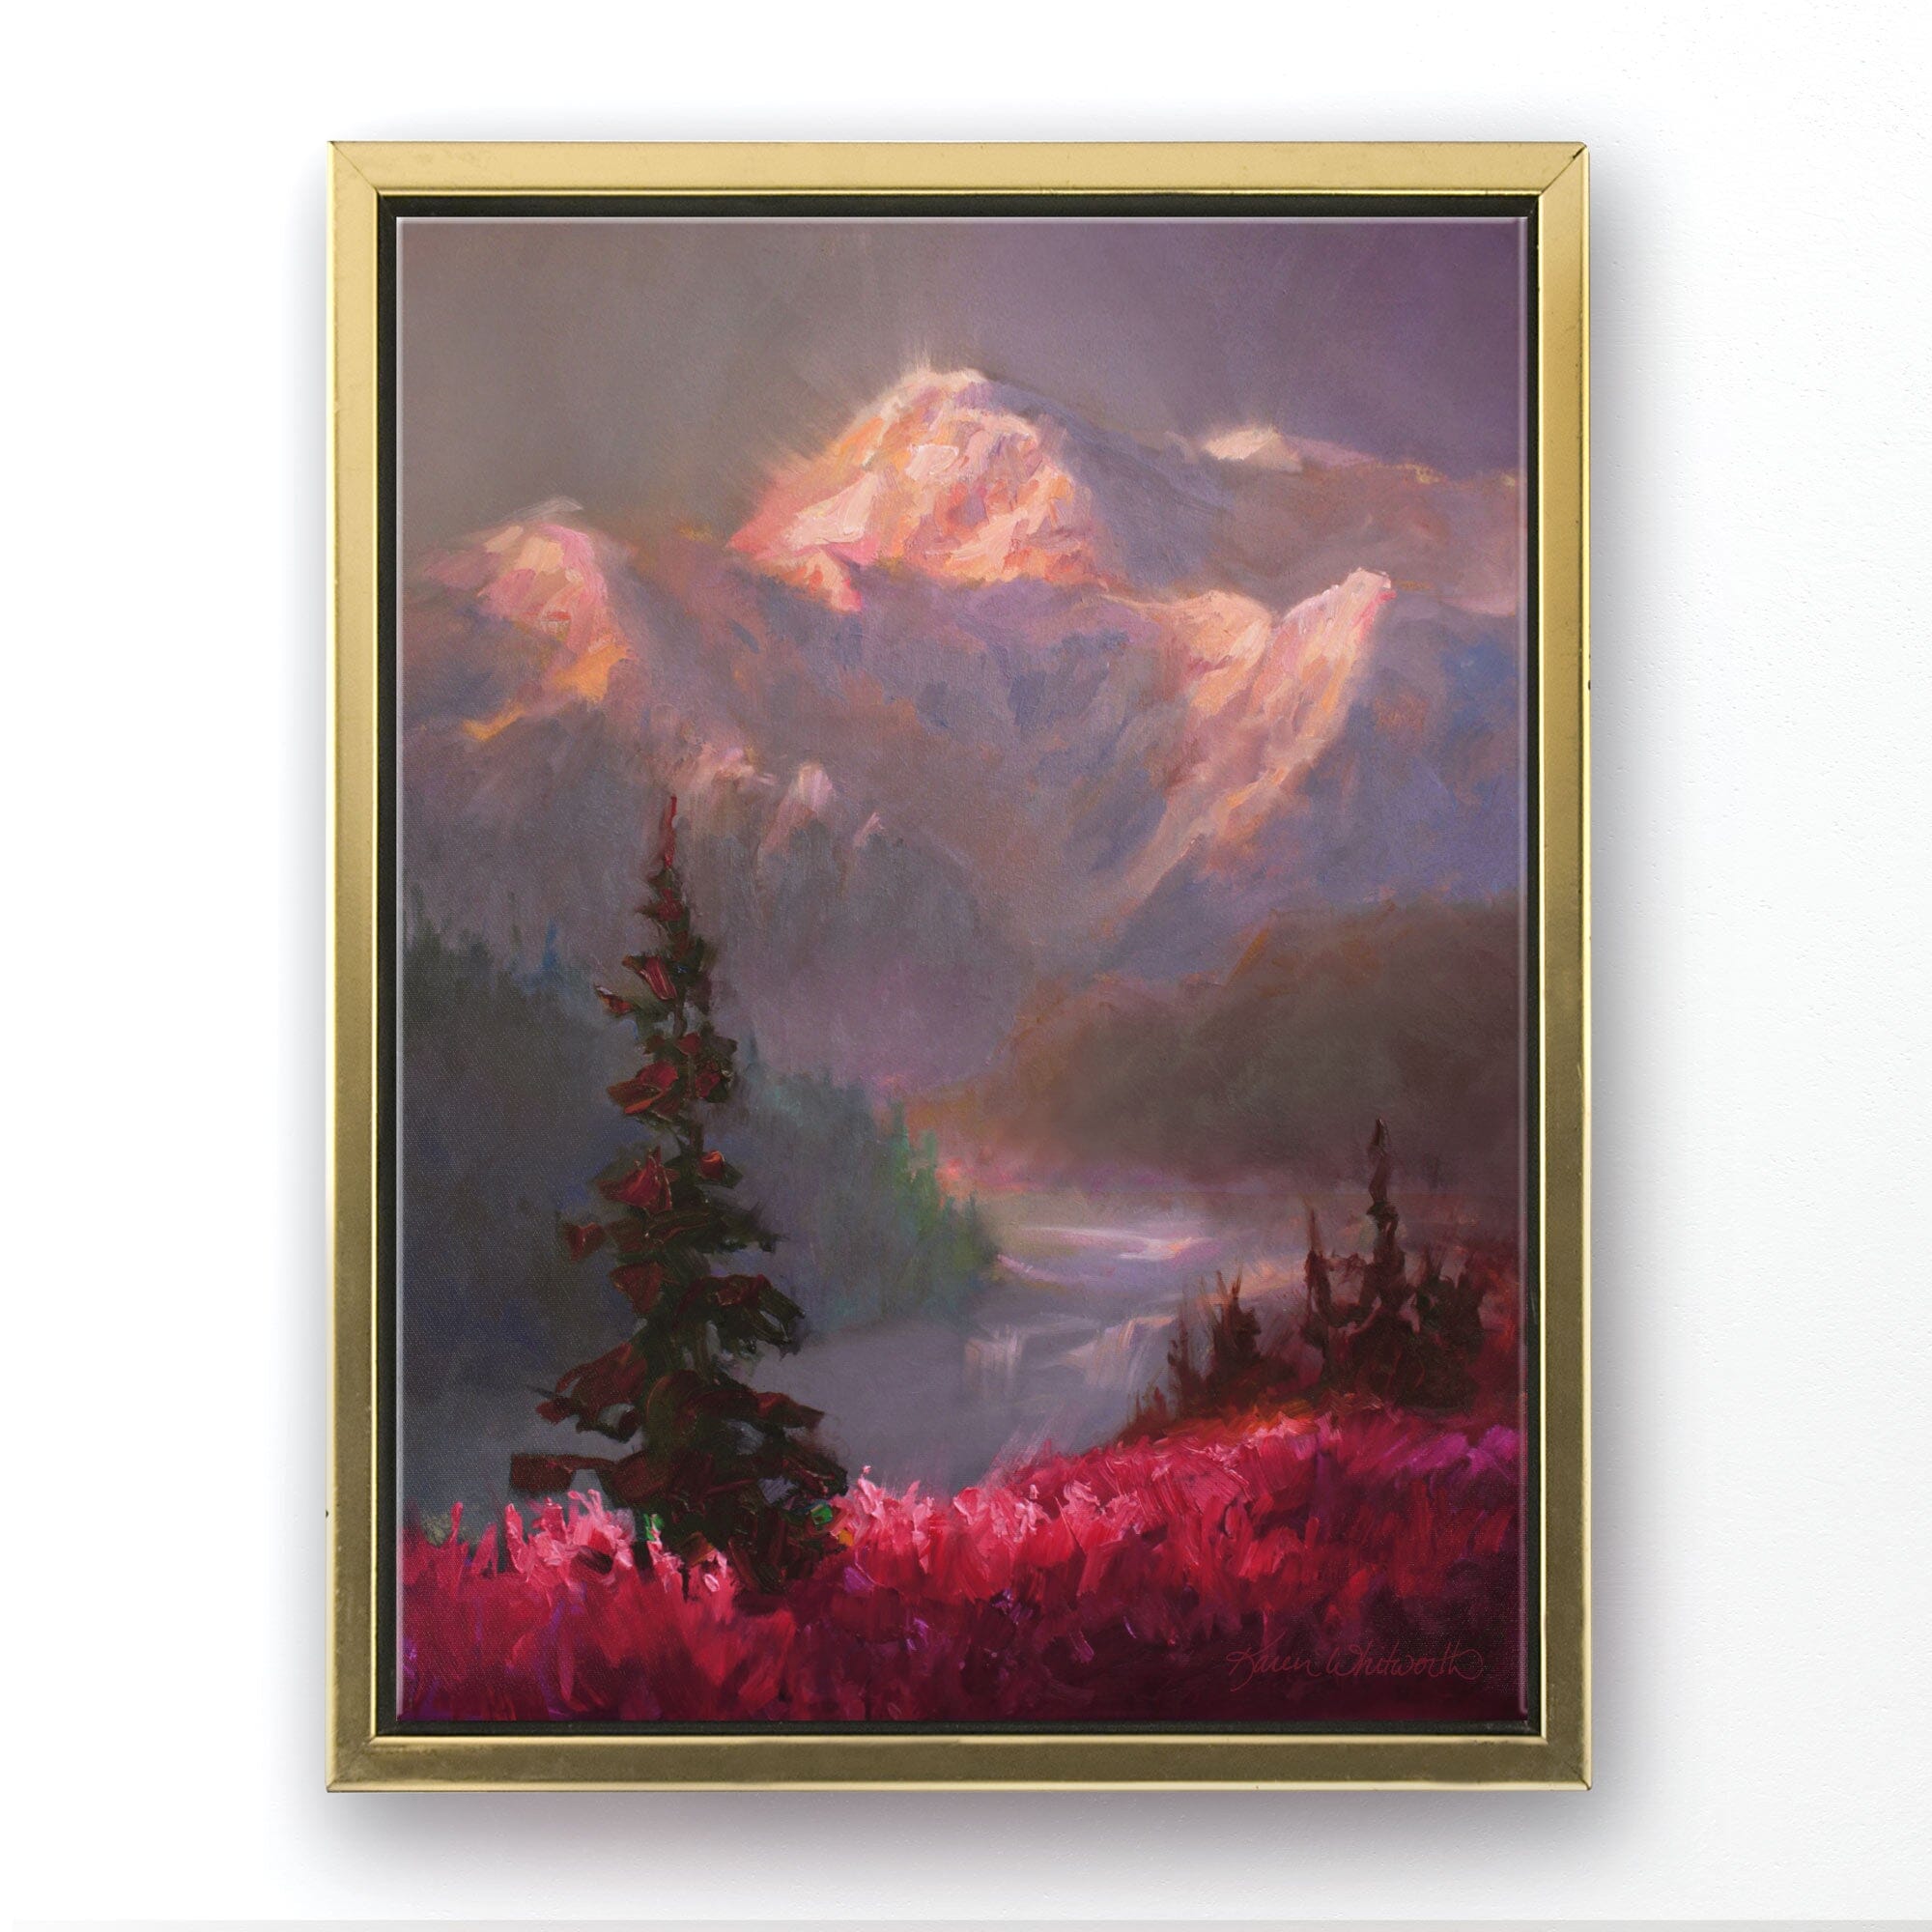 Alaska canvas art of mountain landscape painting depicting Denali in the background and trees and fireweed flowers in the foreground. The wall art is framed in a gold floater frame and hanging on a white wall. 